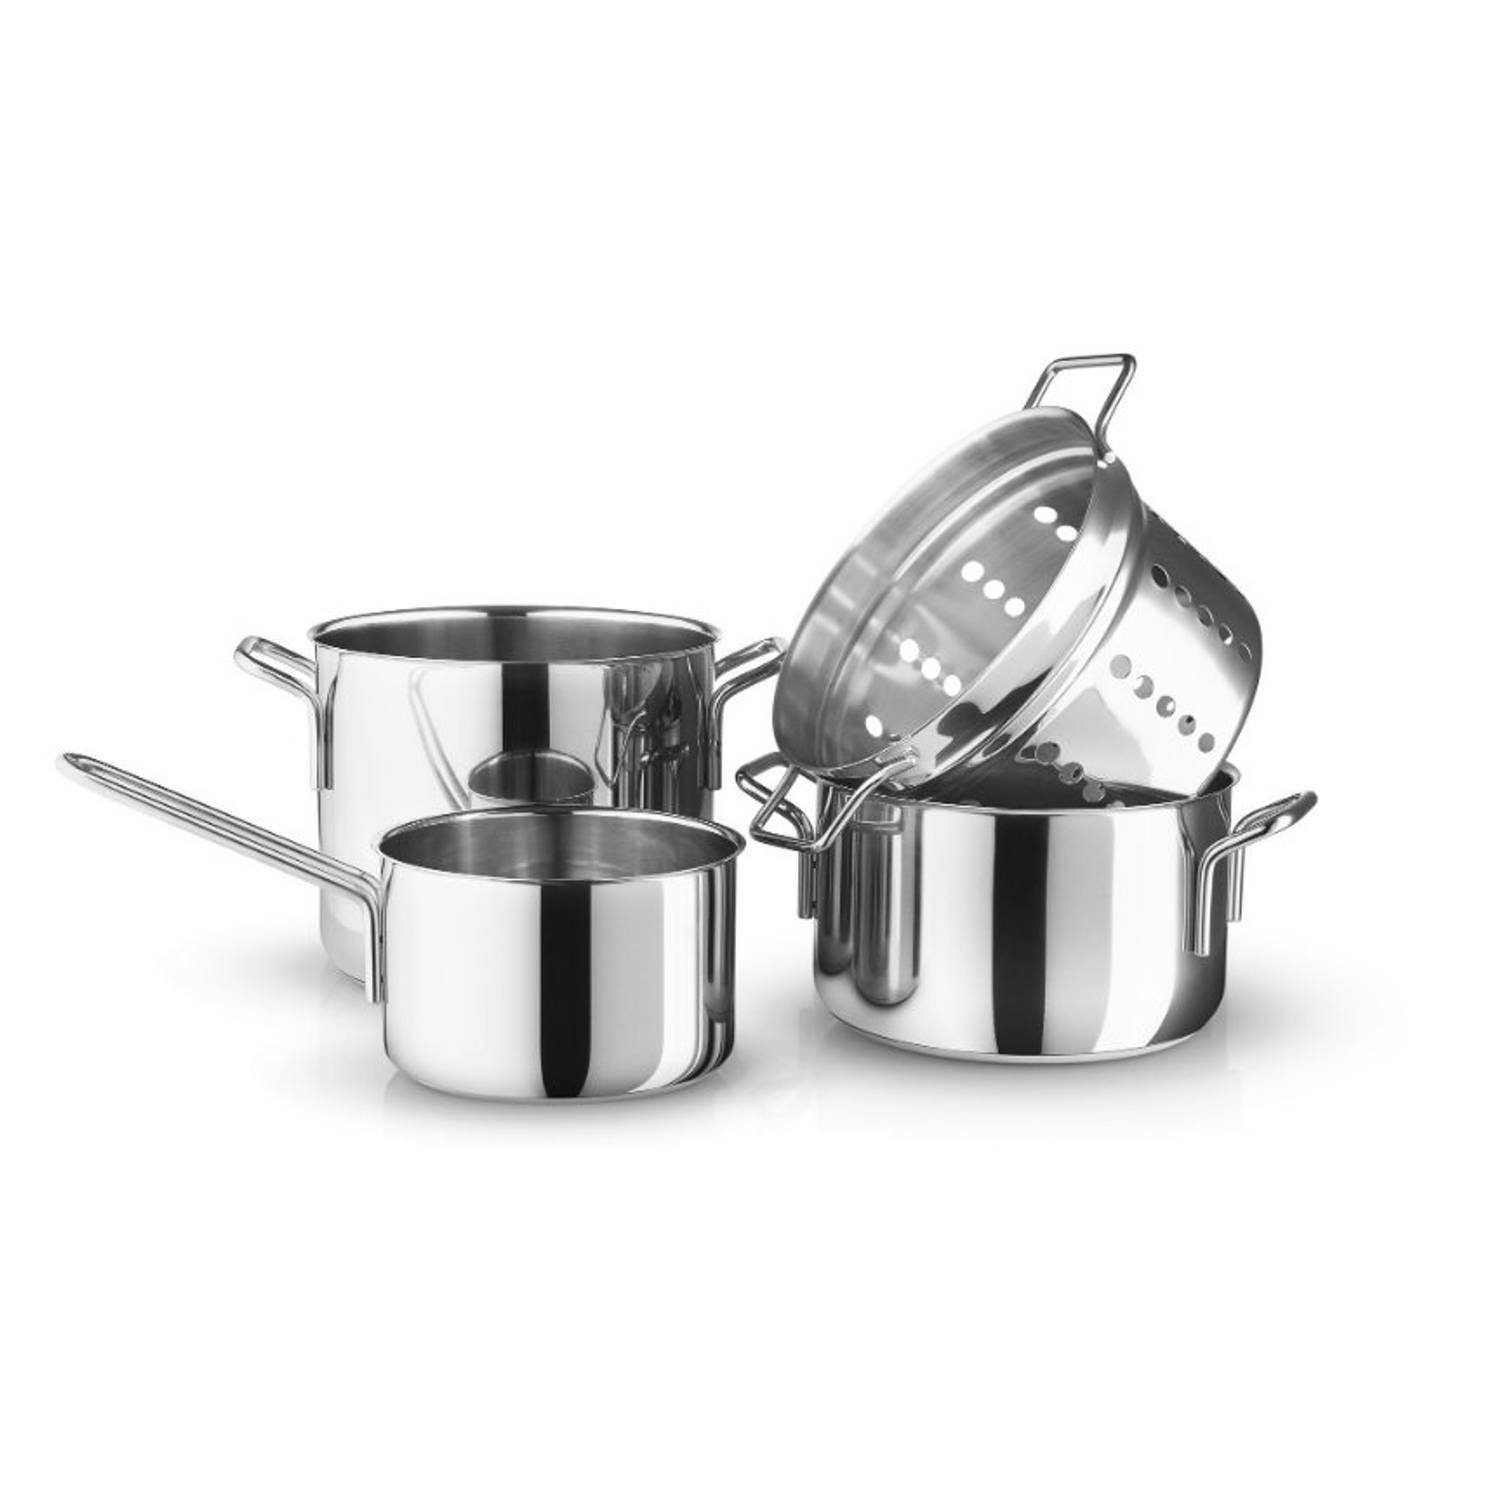 Eva Trio Stainless Steel Collection Box Set with 3 Pot (202350)